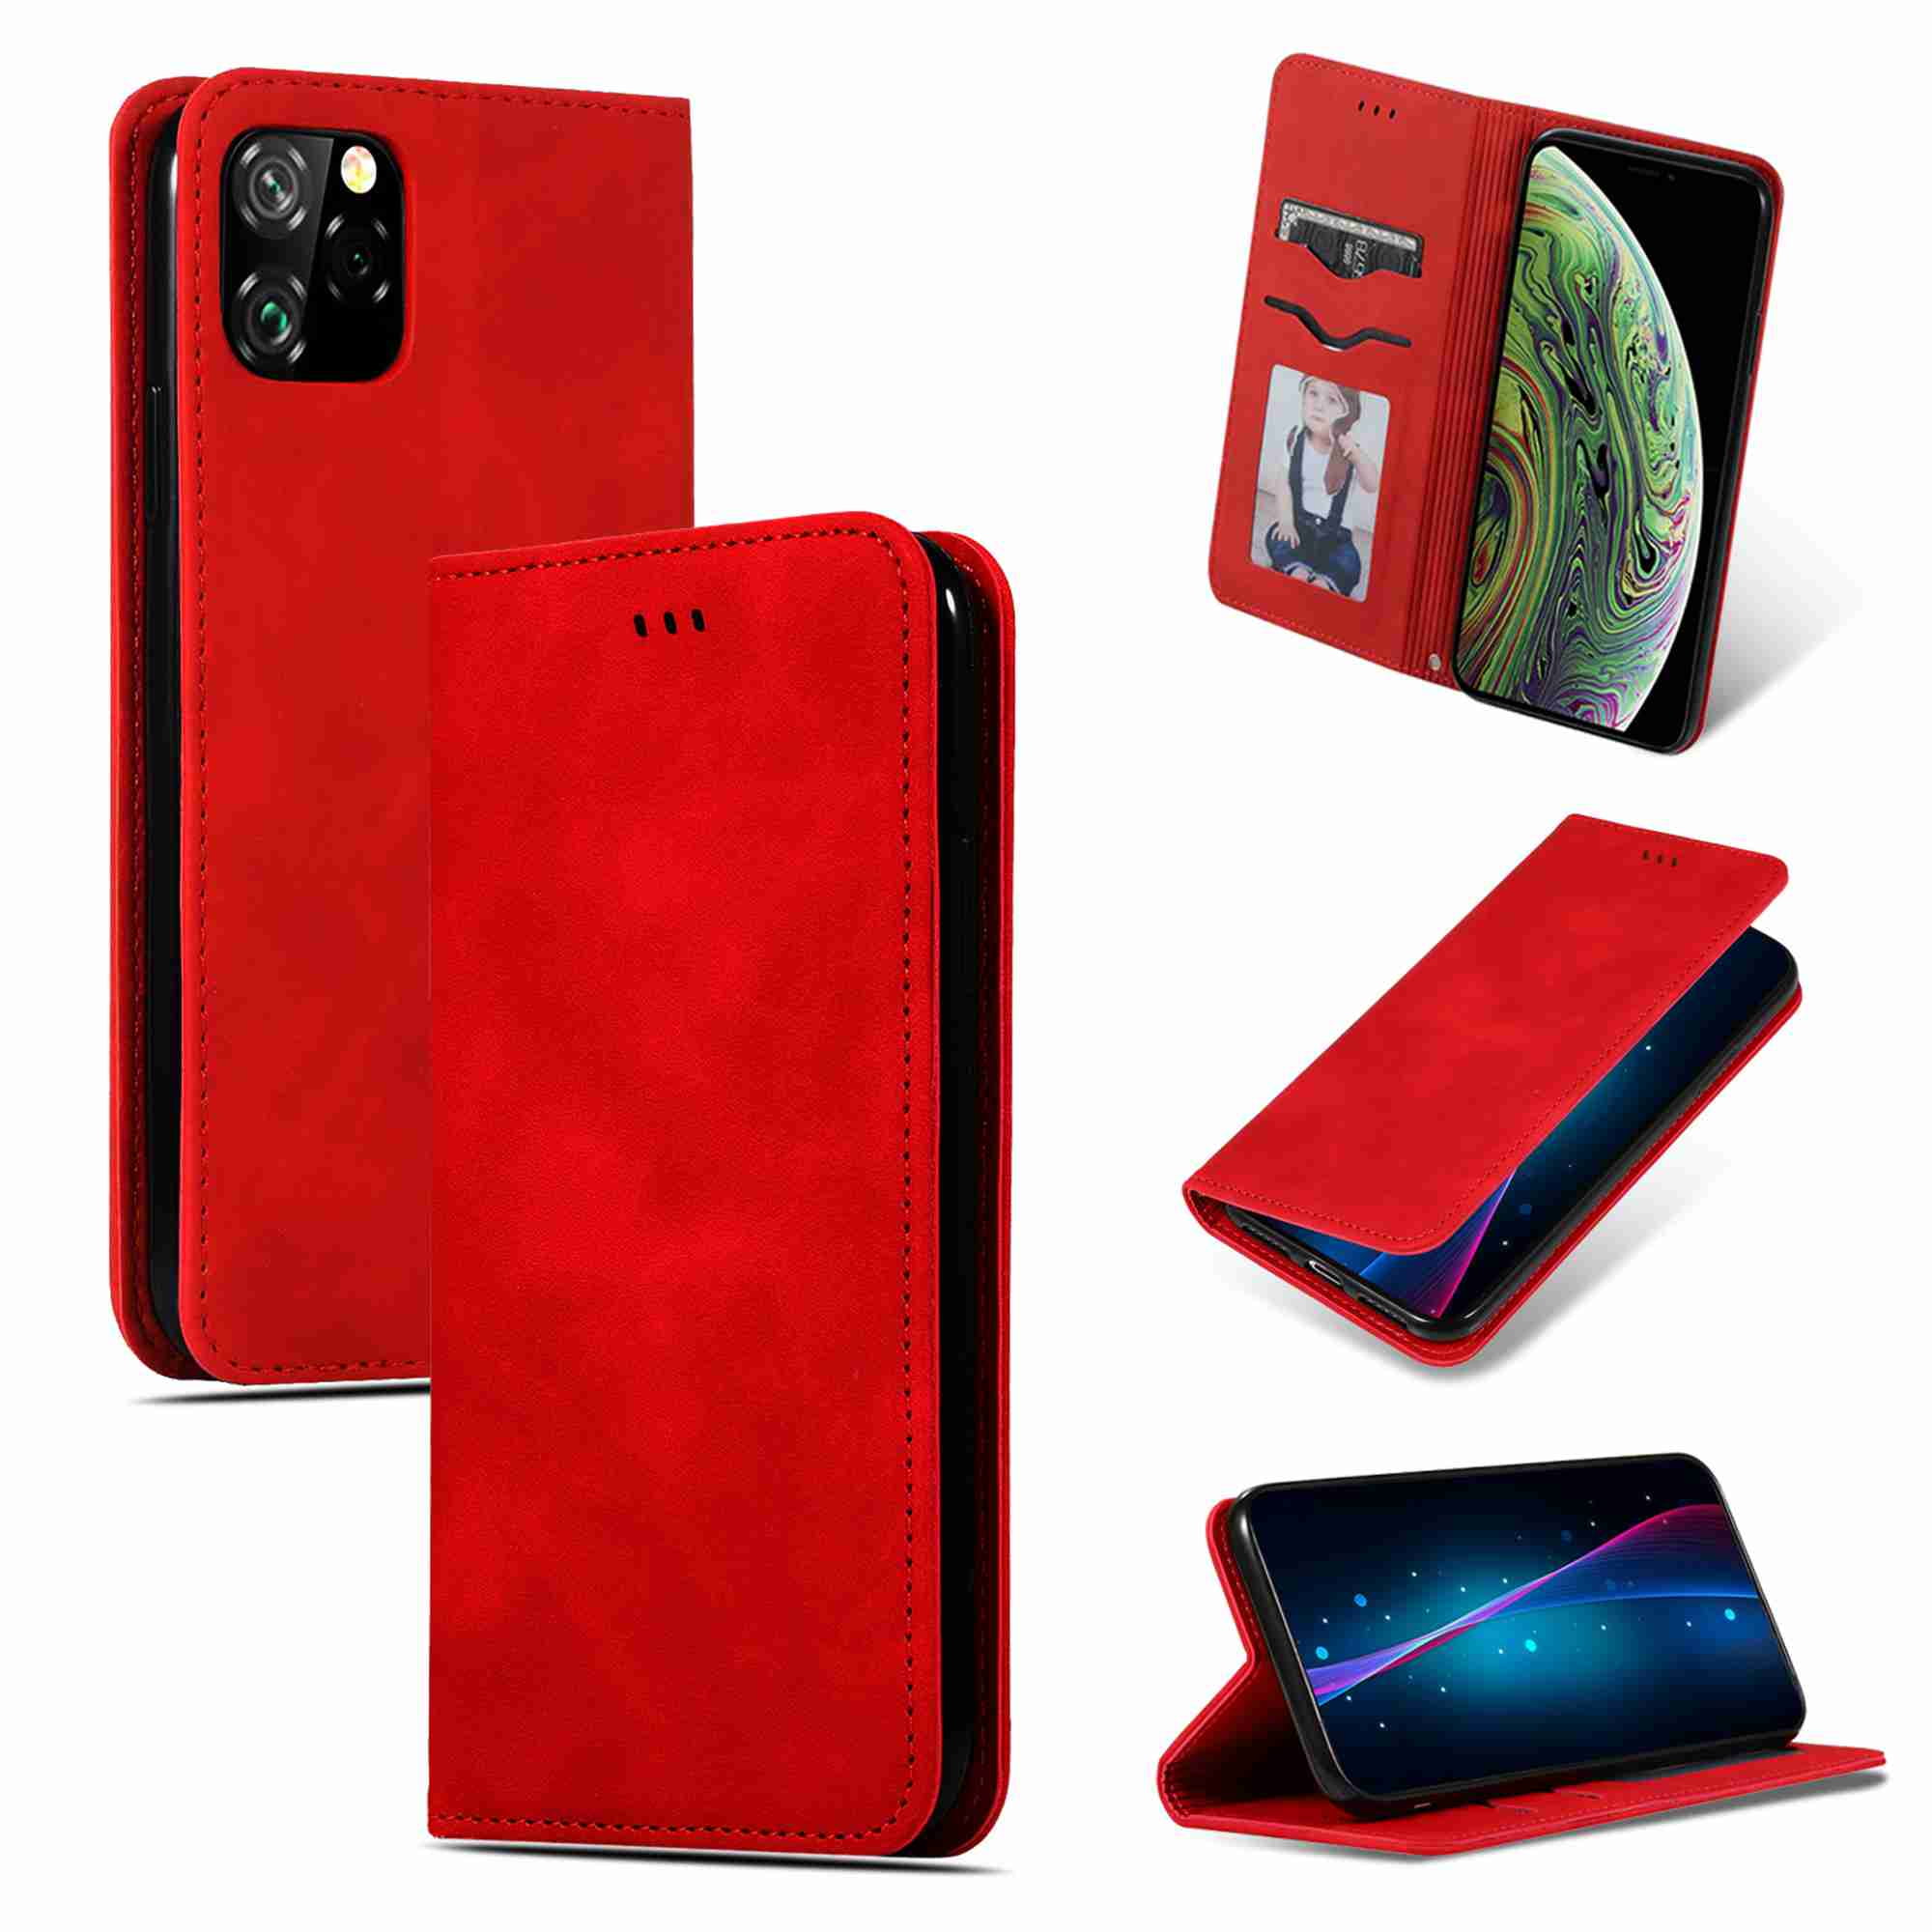 iPhone 11 Pro Max Flip Case Cover for Leather Card Holders Kickstand Extra-Shockproof Business Wallet Cover Flip Cover 